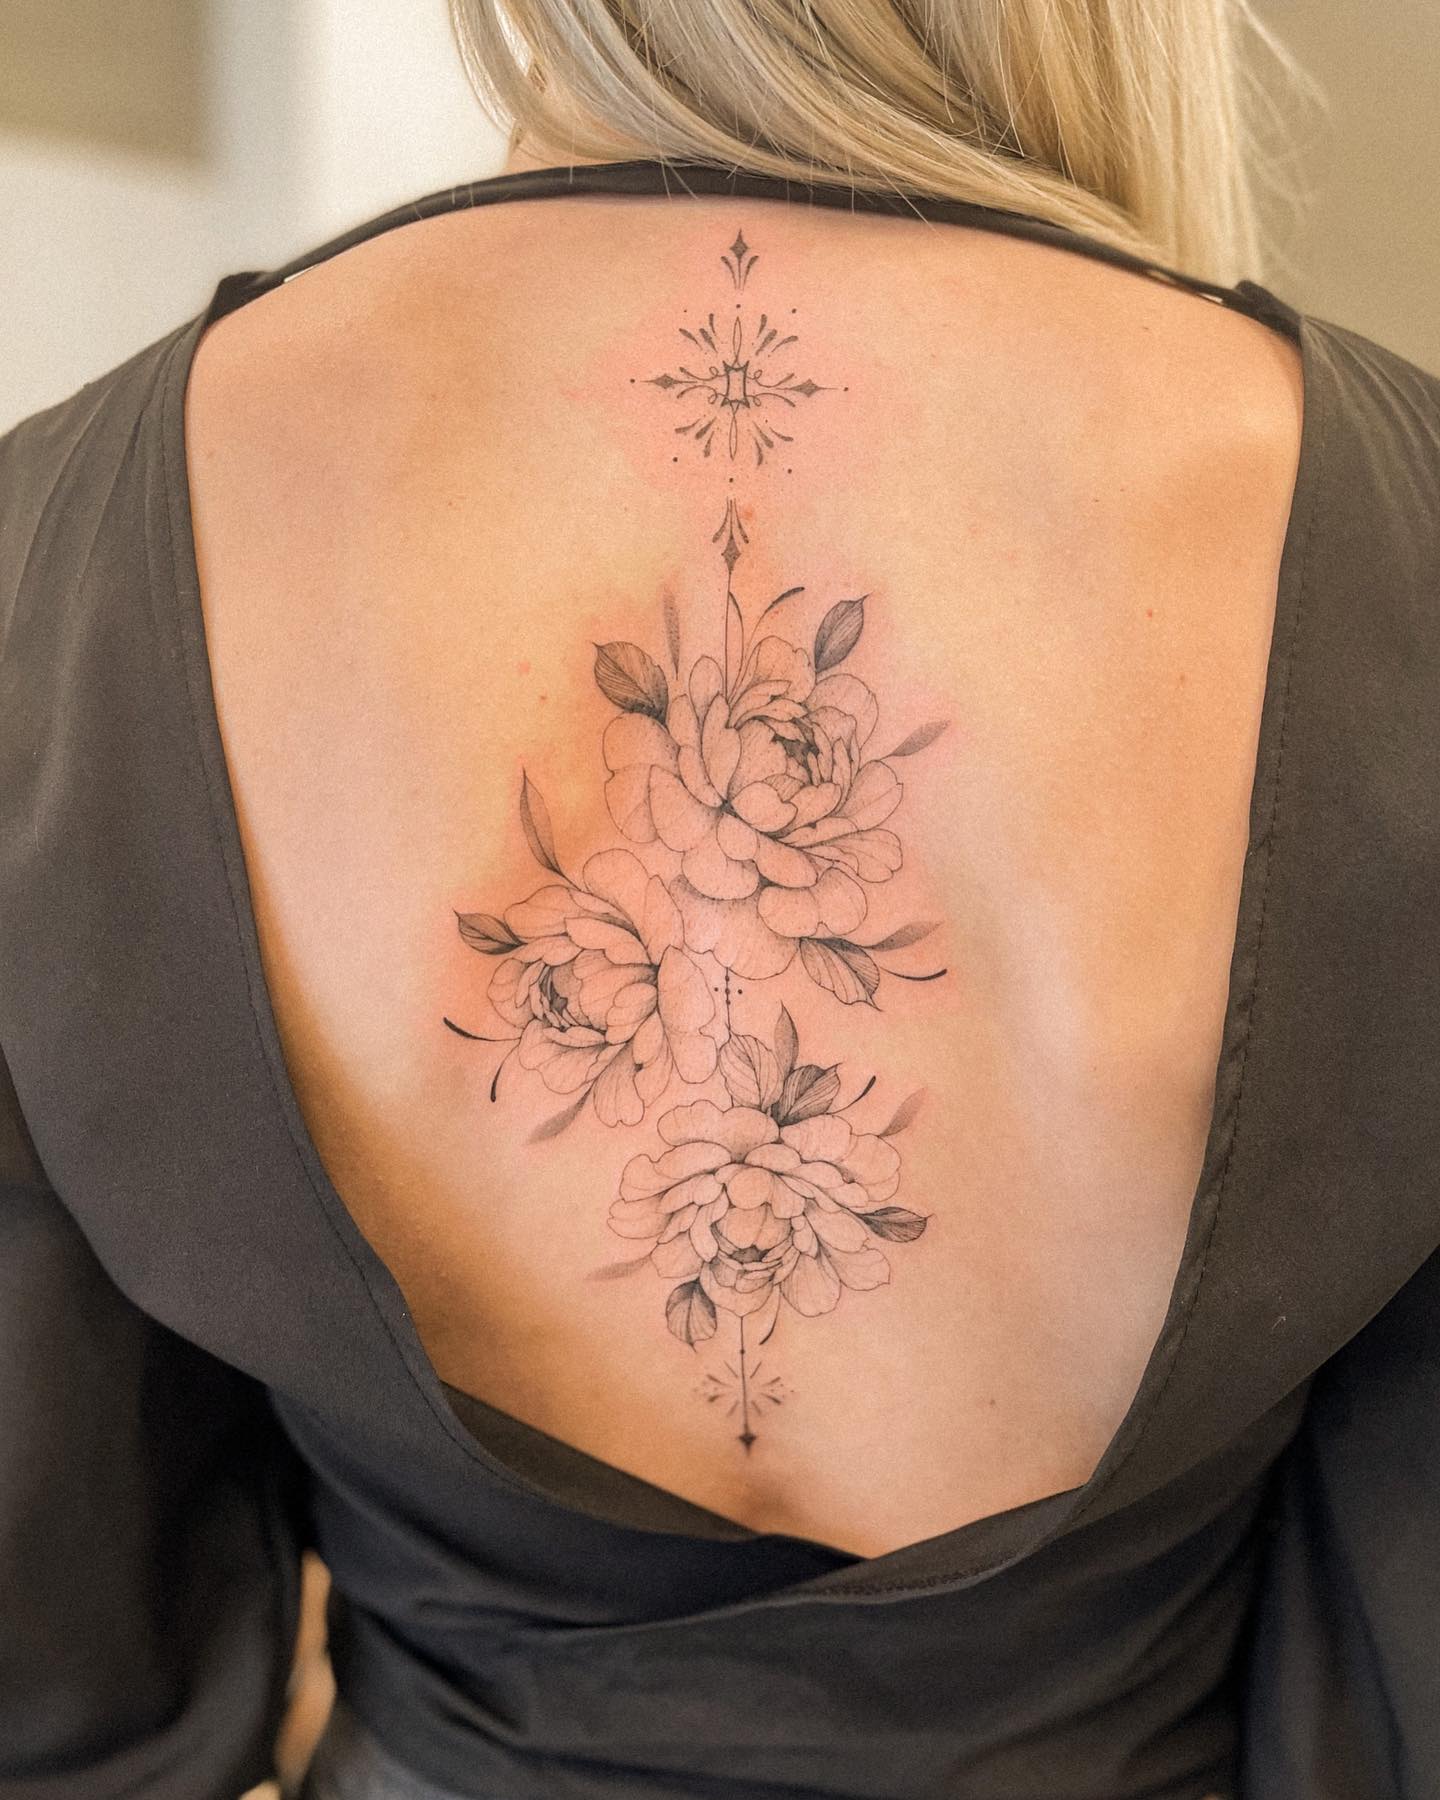 This type of back tattoo will take 3-4 hours to do. Book a trustworthy tattoo artist before giving it a try with this design.